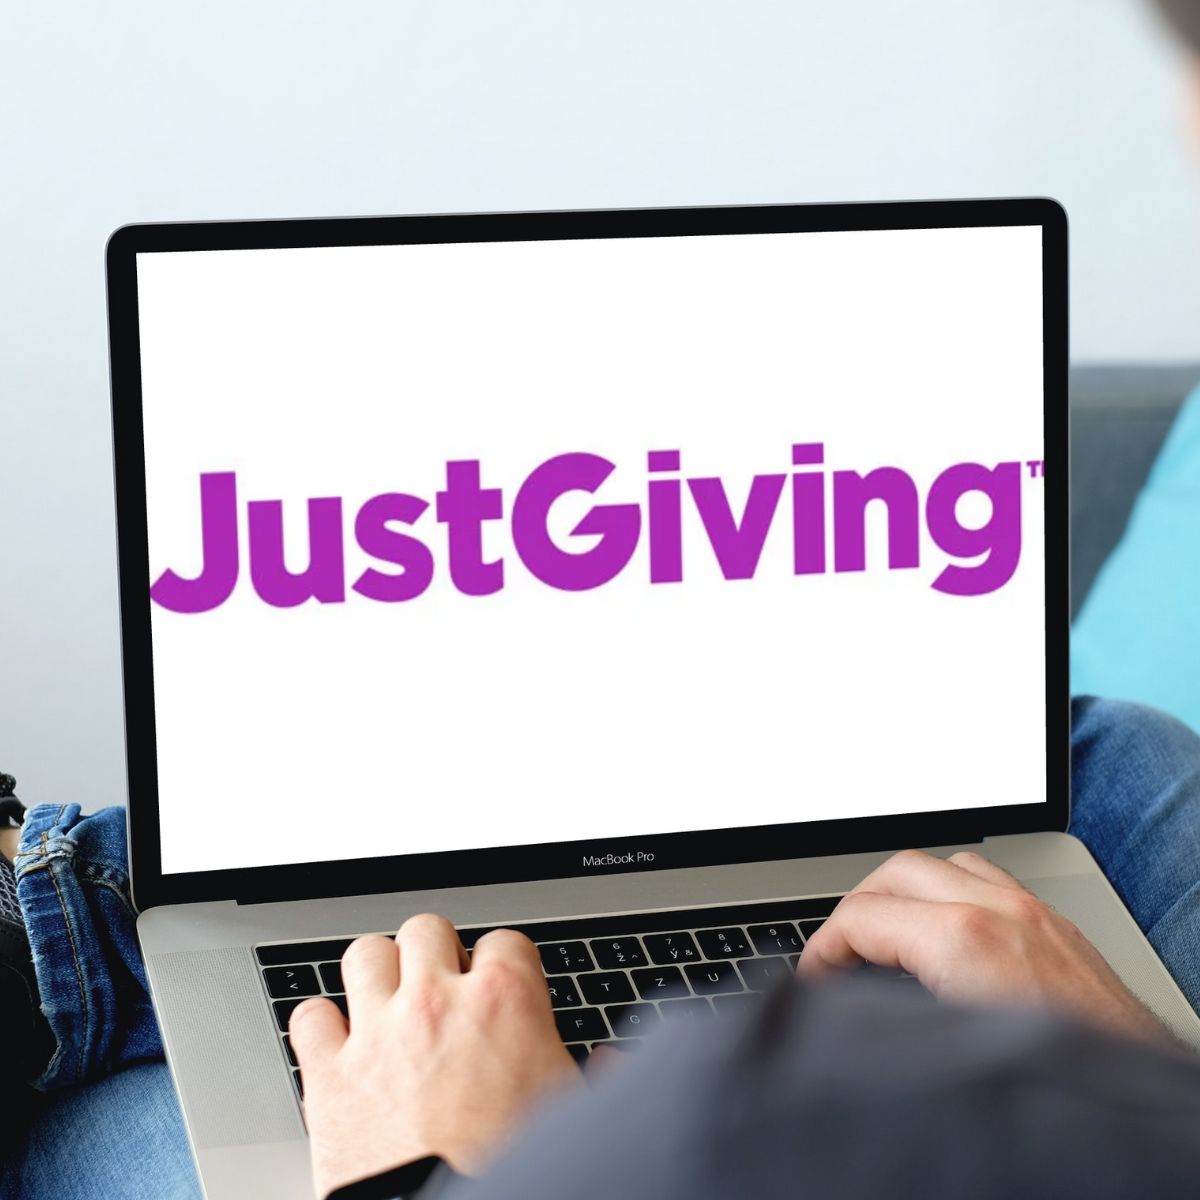 Man on his laptop with JustGiving logo